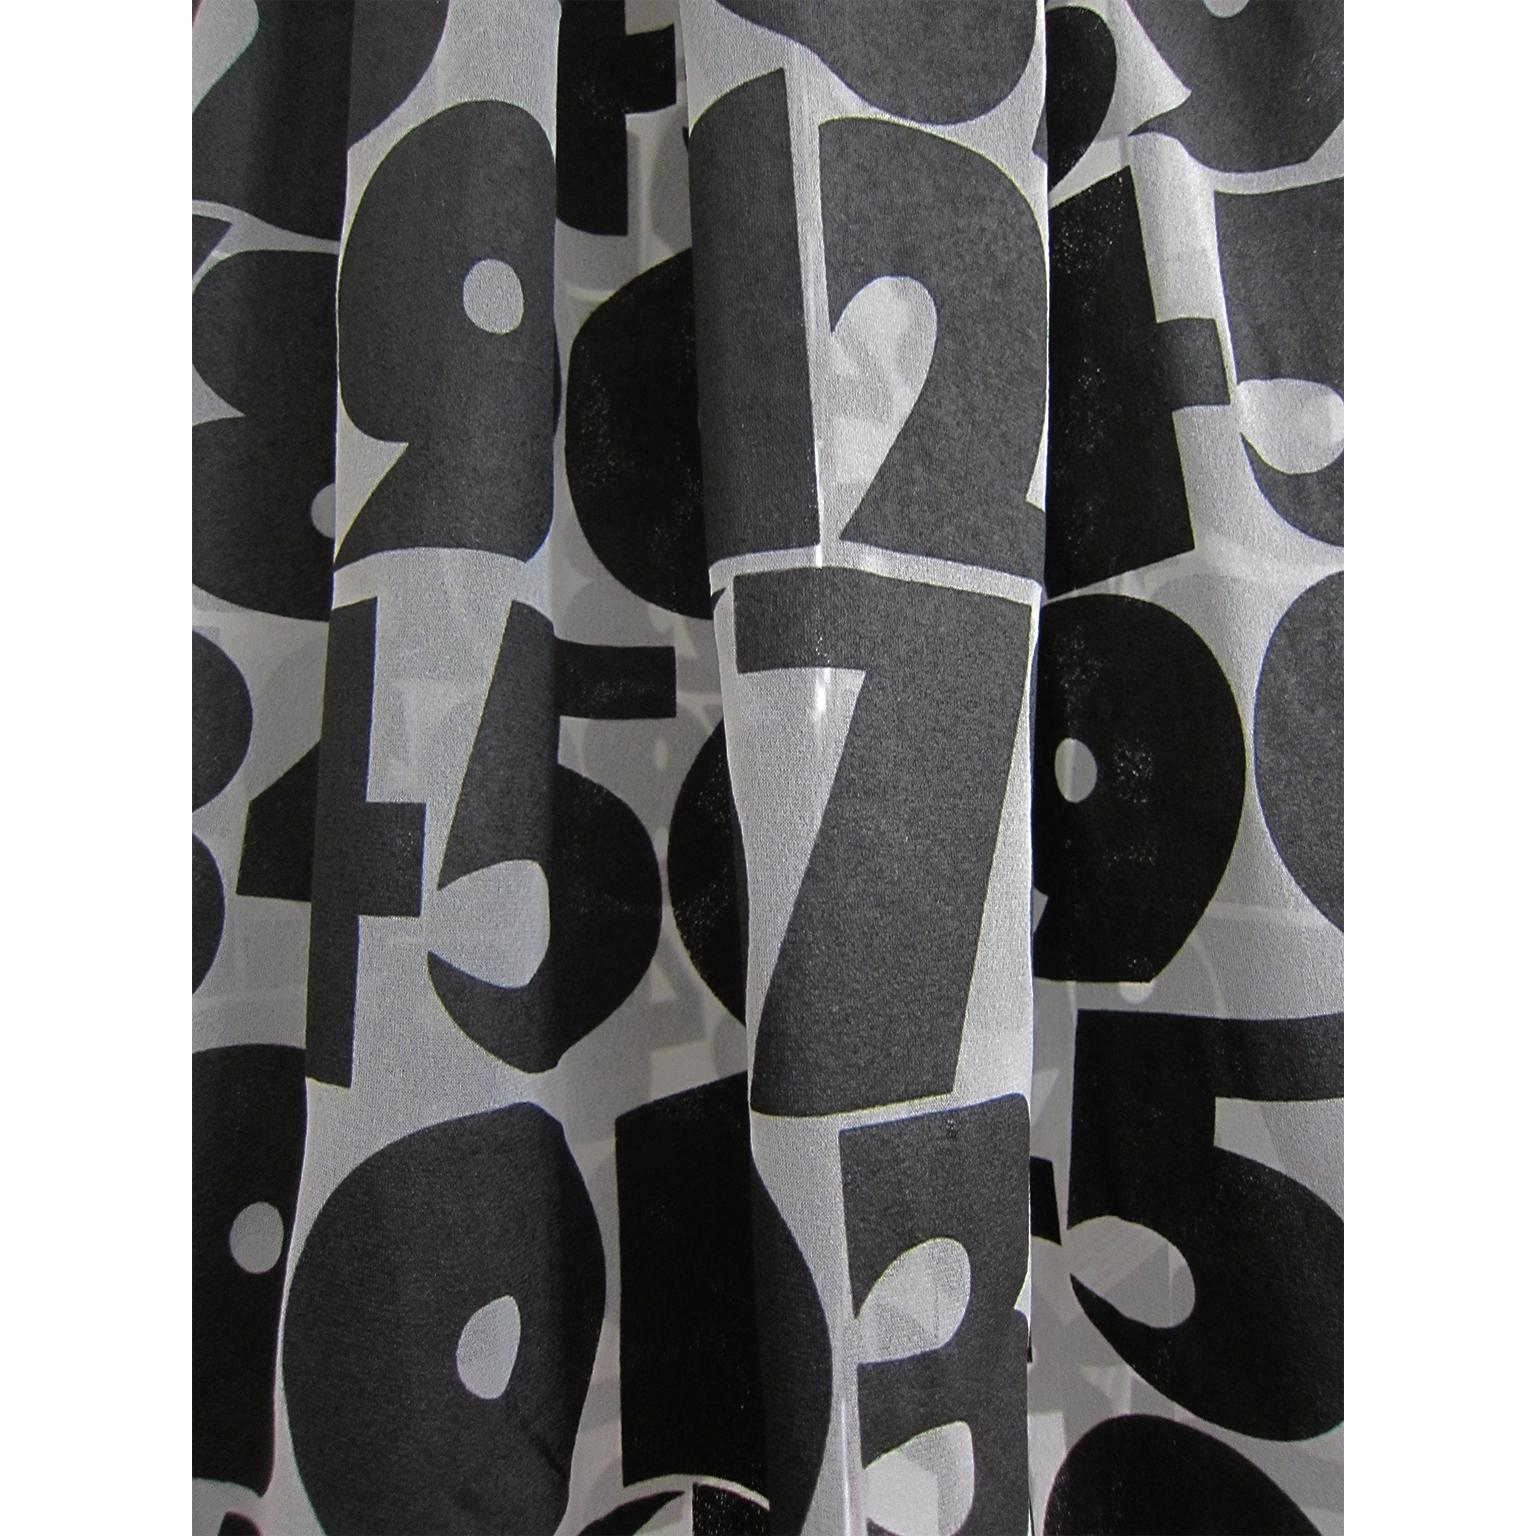 Women's Comme des Garcons Numbers Print Skirt AD 2001 